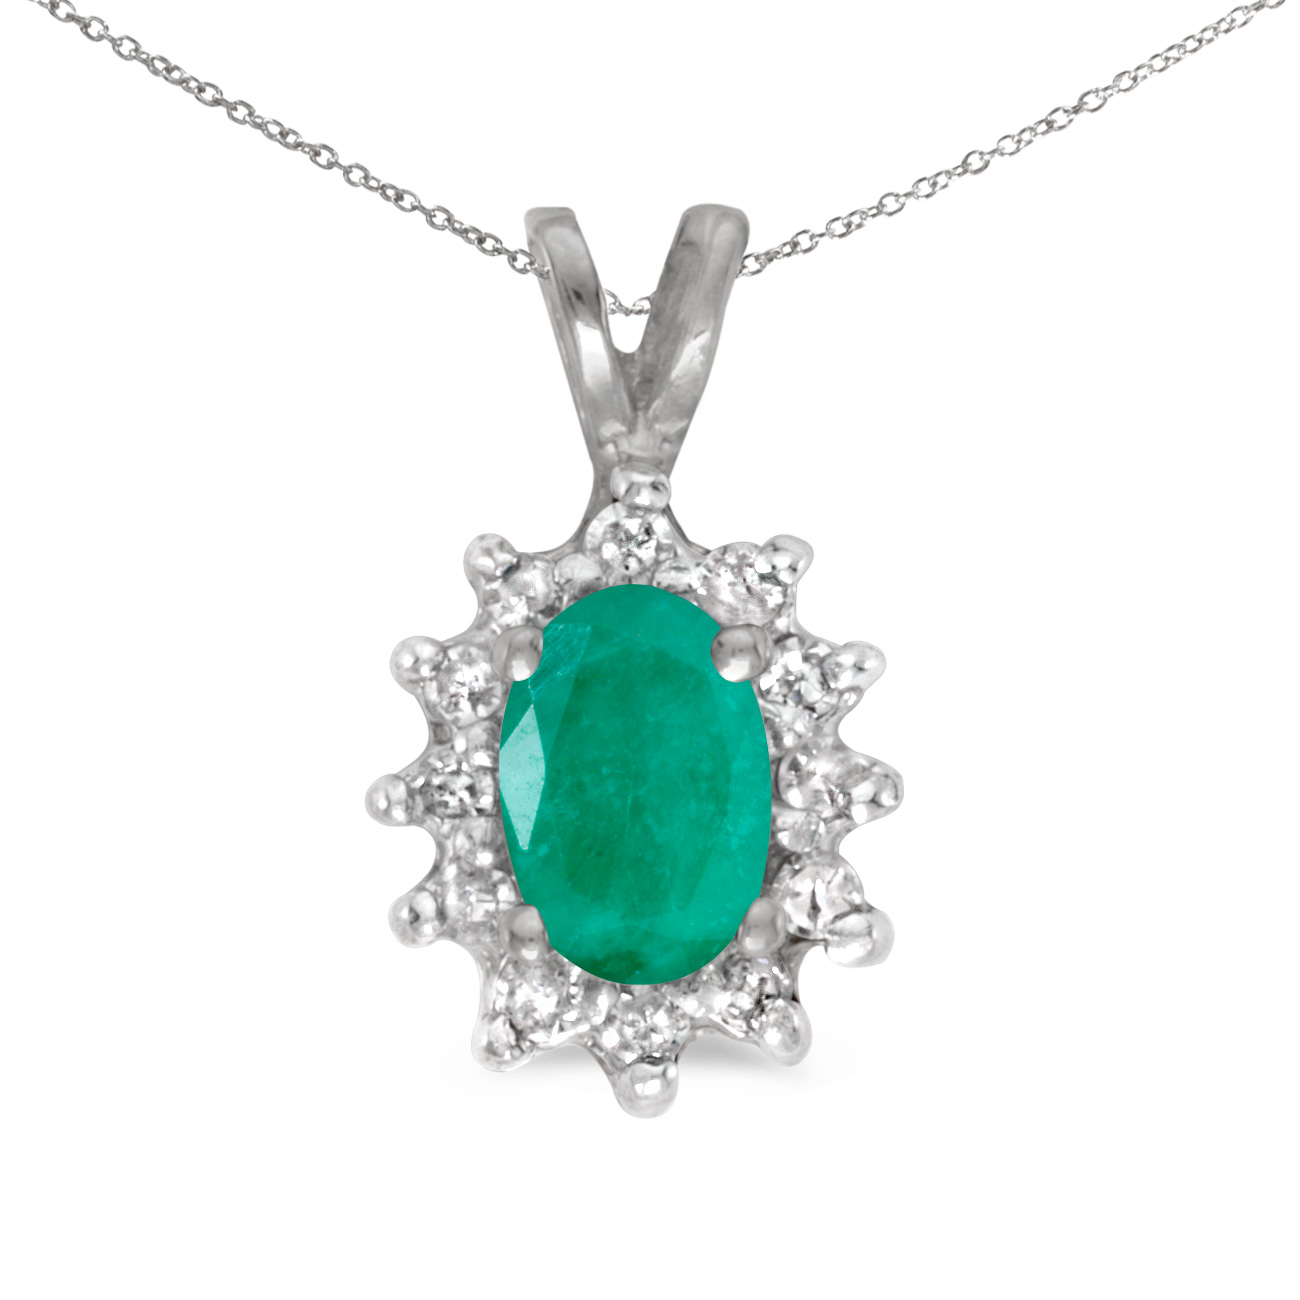 JCX2747: This 14k white gold oval emerald and diamond pendant features a 6x4 mm genuine natural emerald with a 0.31 ct total weight.